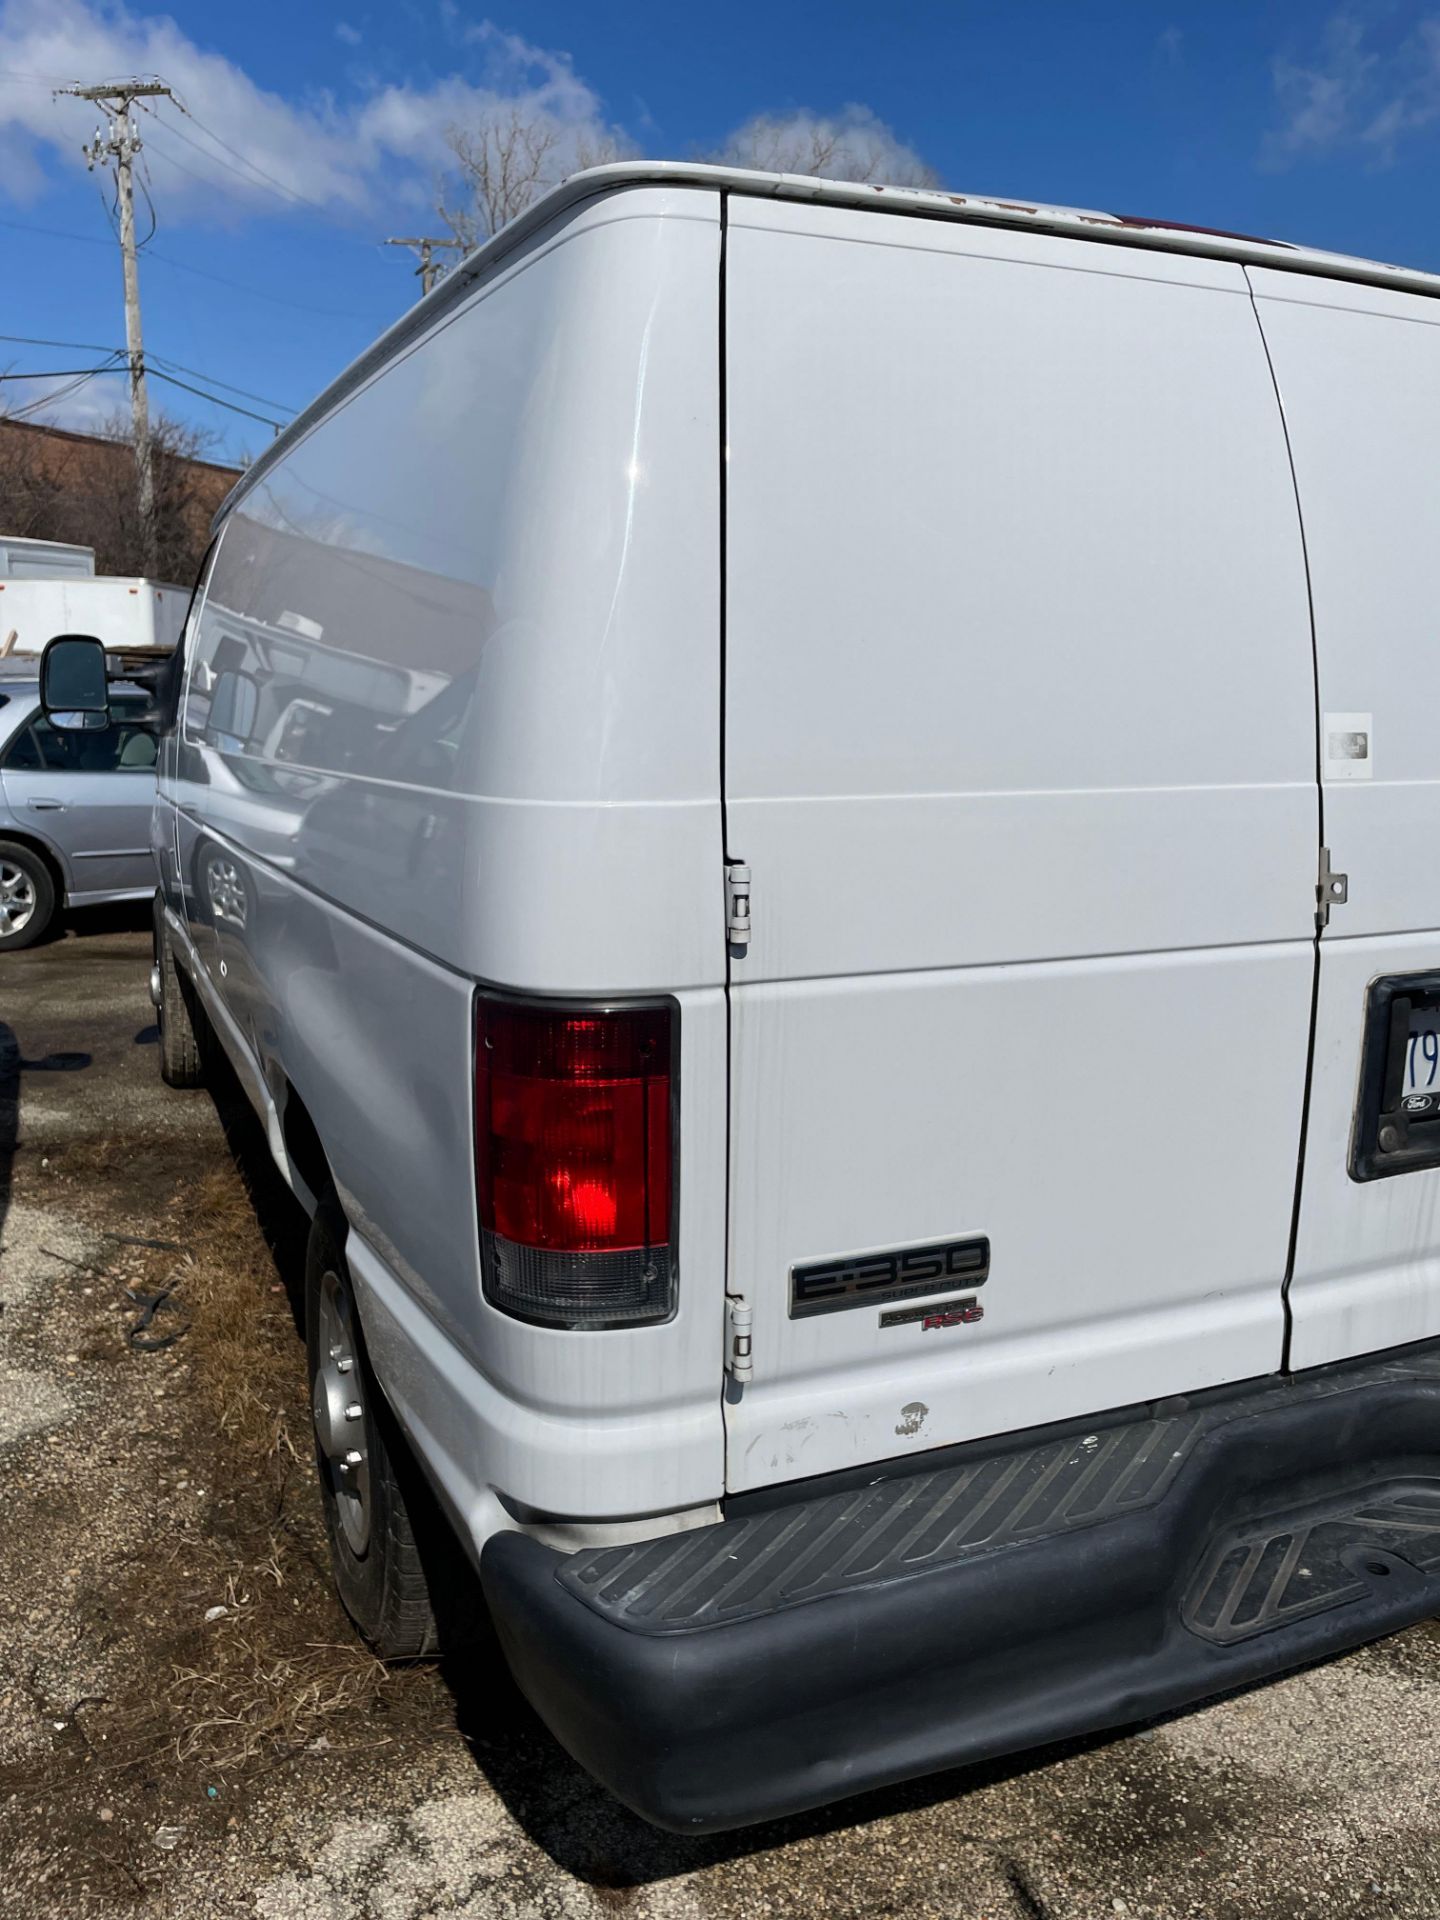 2014 FORD E-350 SUPER DUTY CARGO VAN - Image 4 of 37